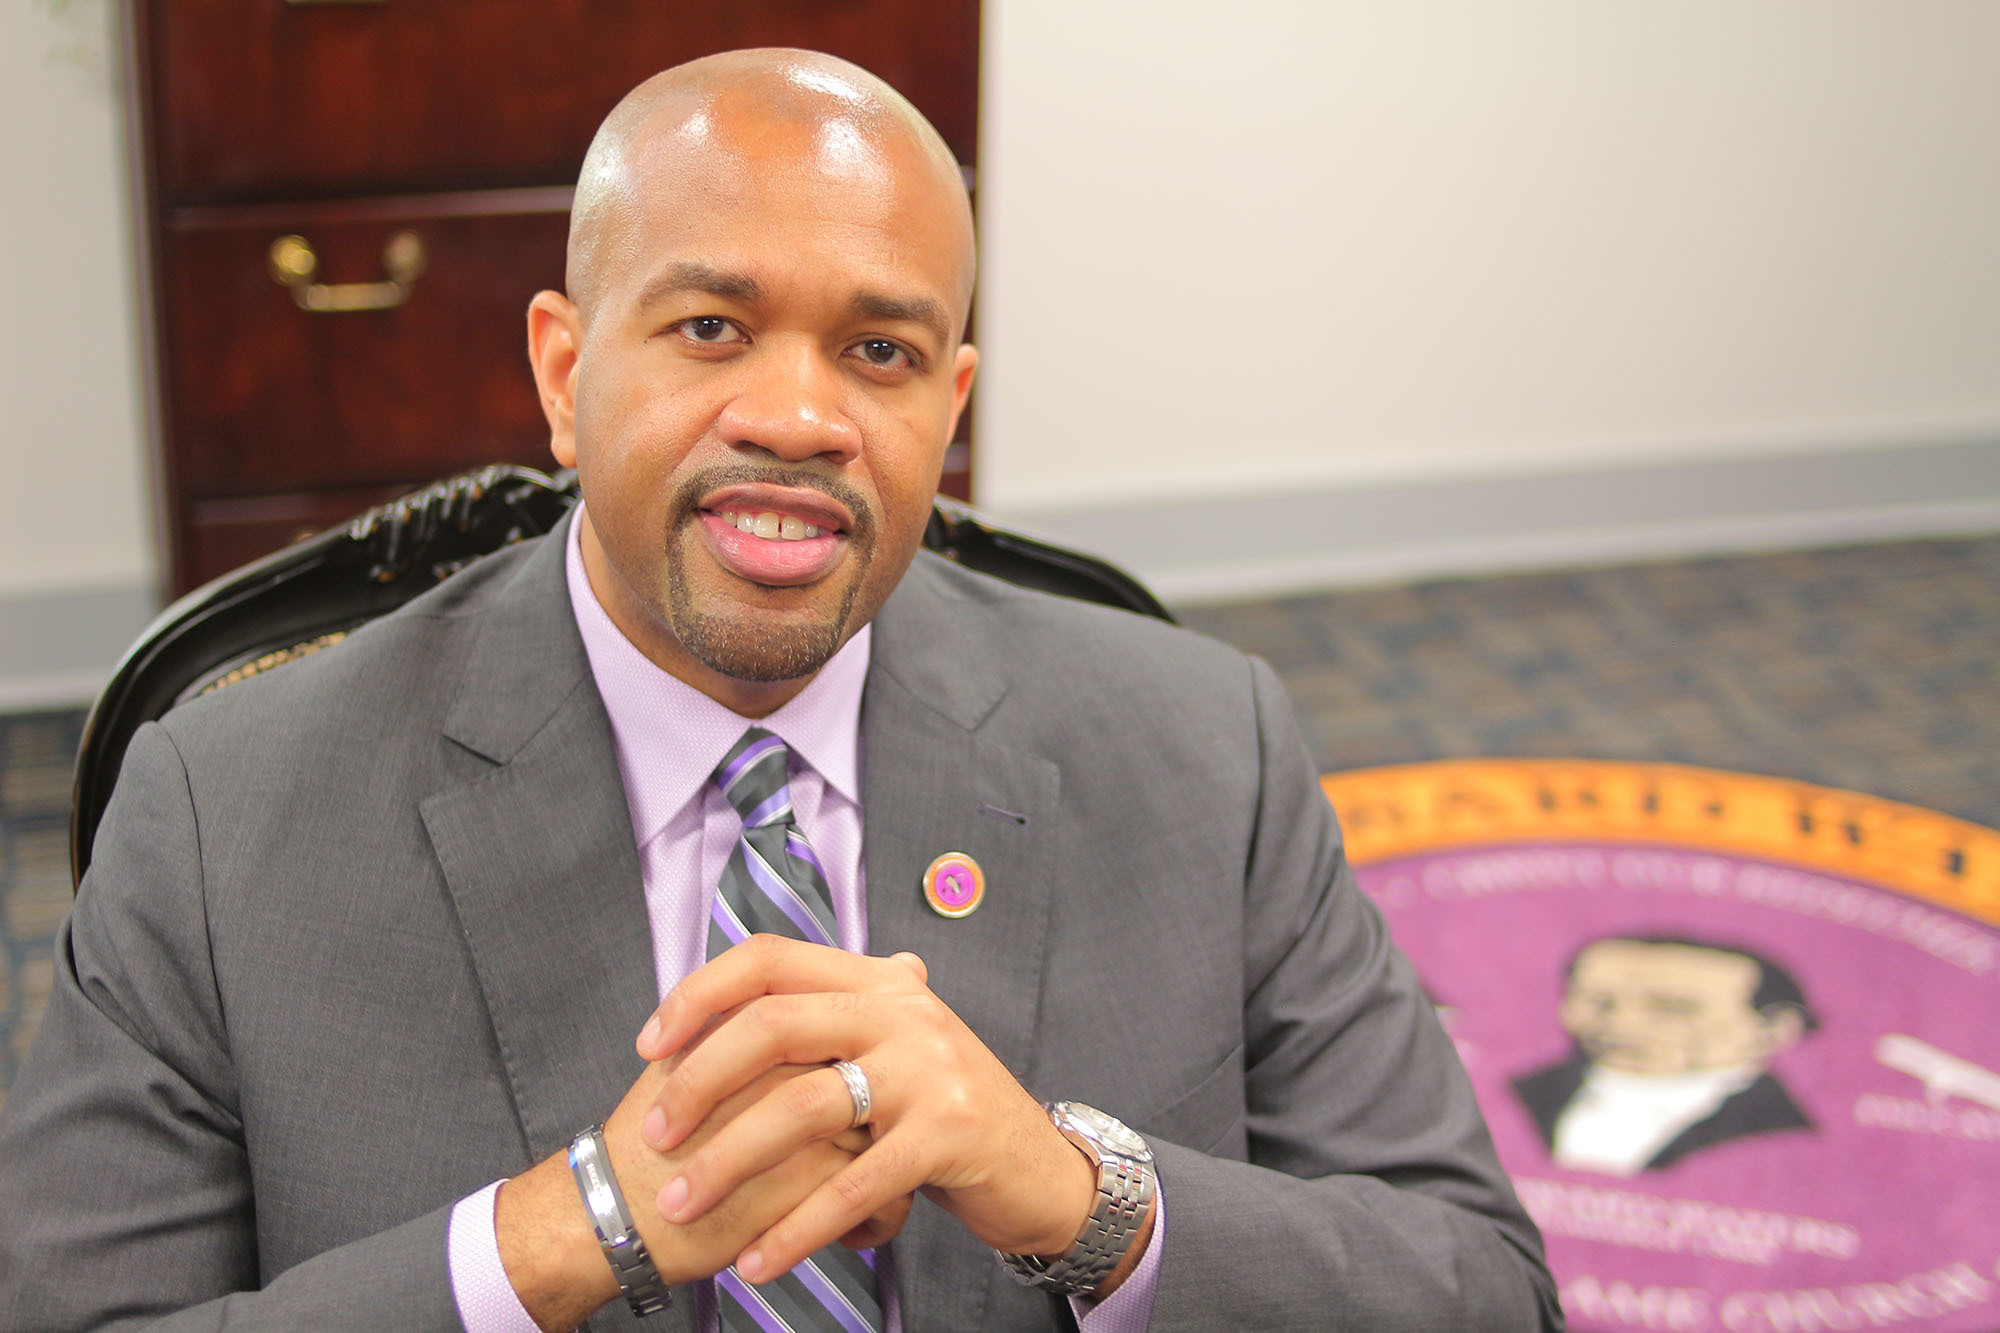 Edward Waters College President A. Zachary Faison Jr.